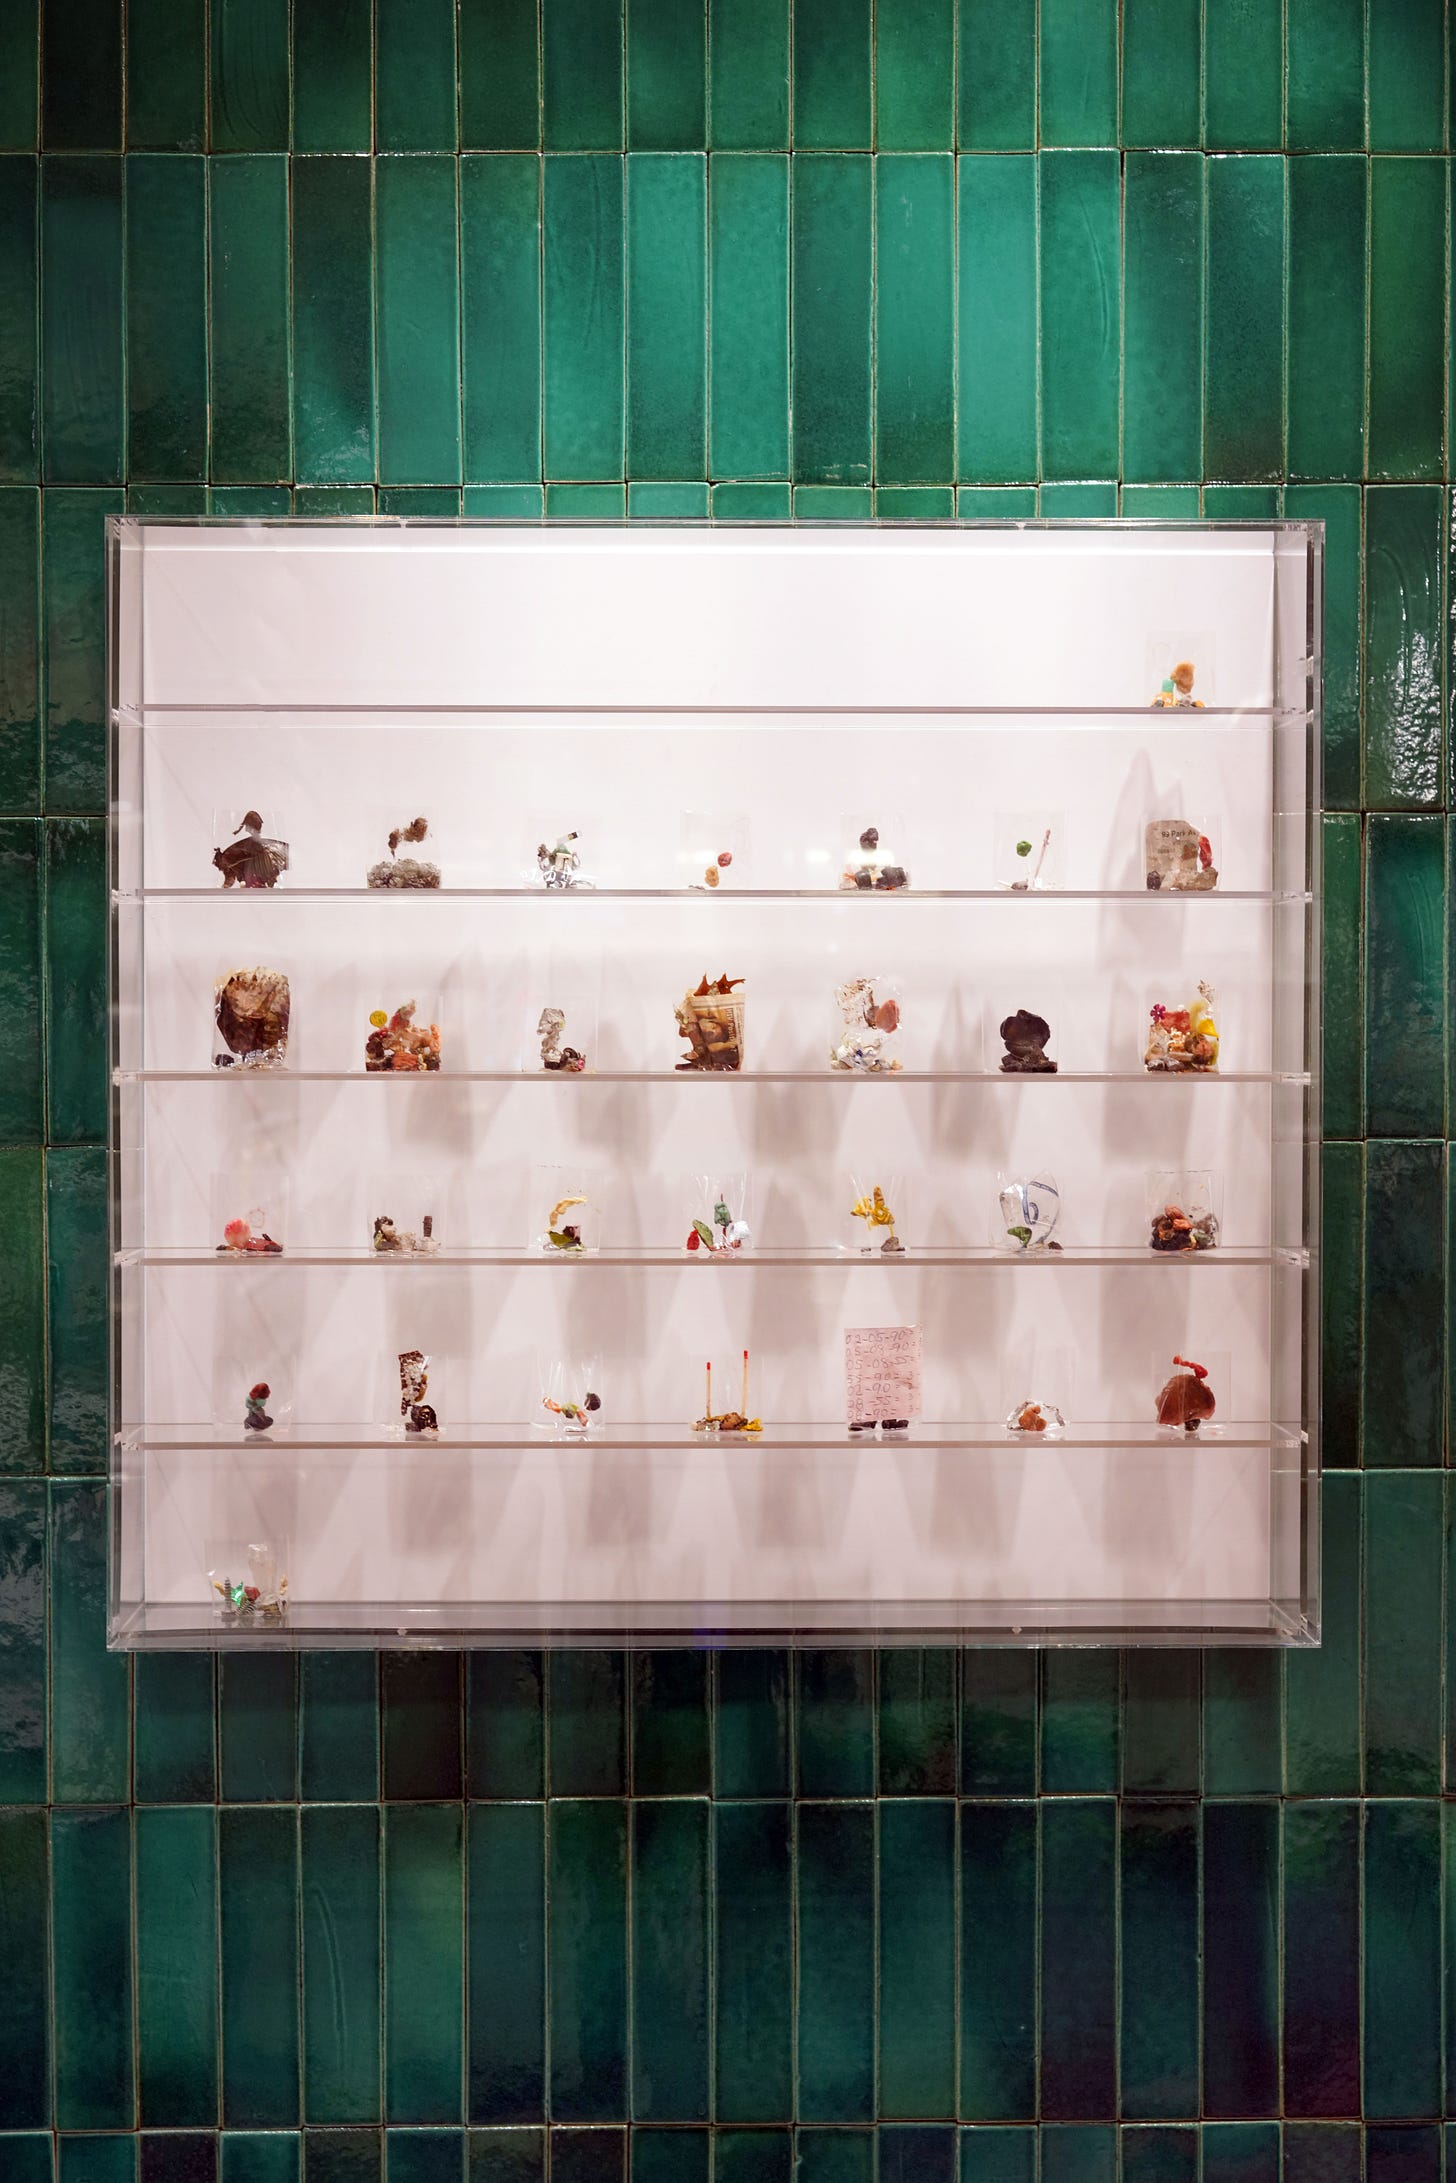 Debris sculptures by Yuji Agematsu, framed by hand-moulded tiles baked in Valencia. Loewe store, South Coast Plaza, 2020. Courtesy